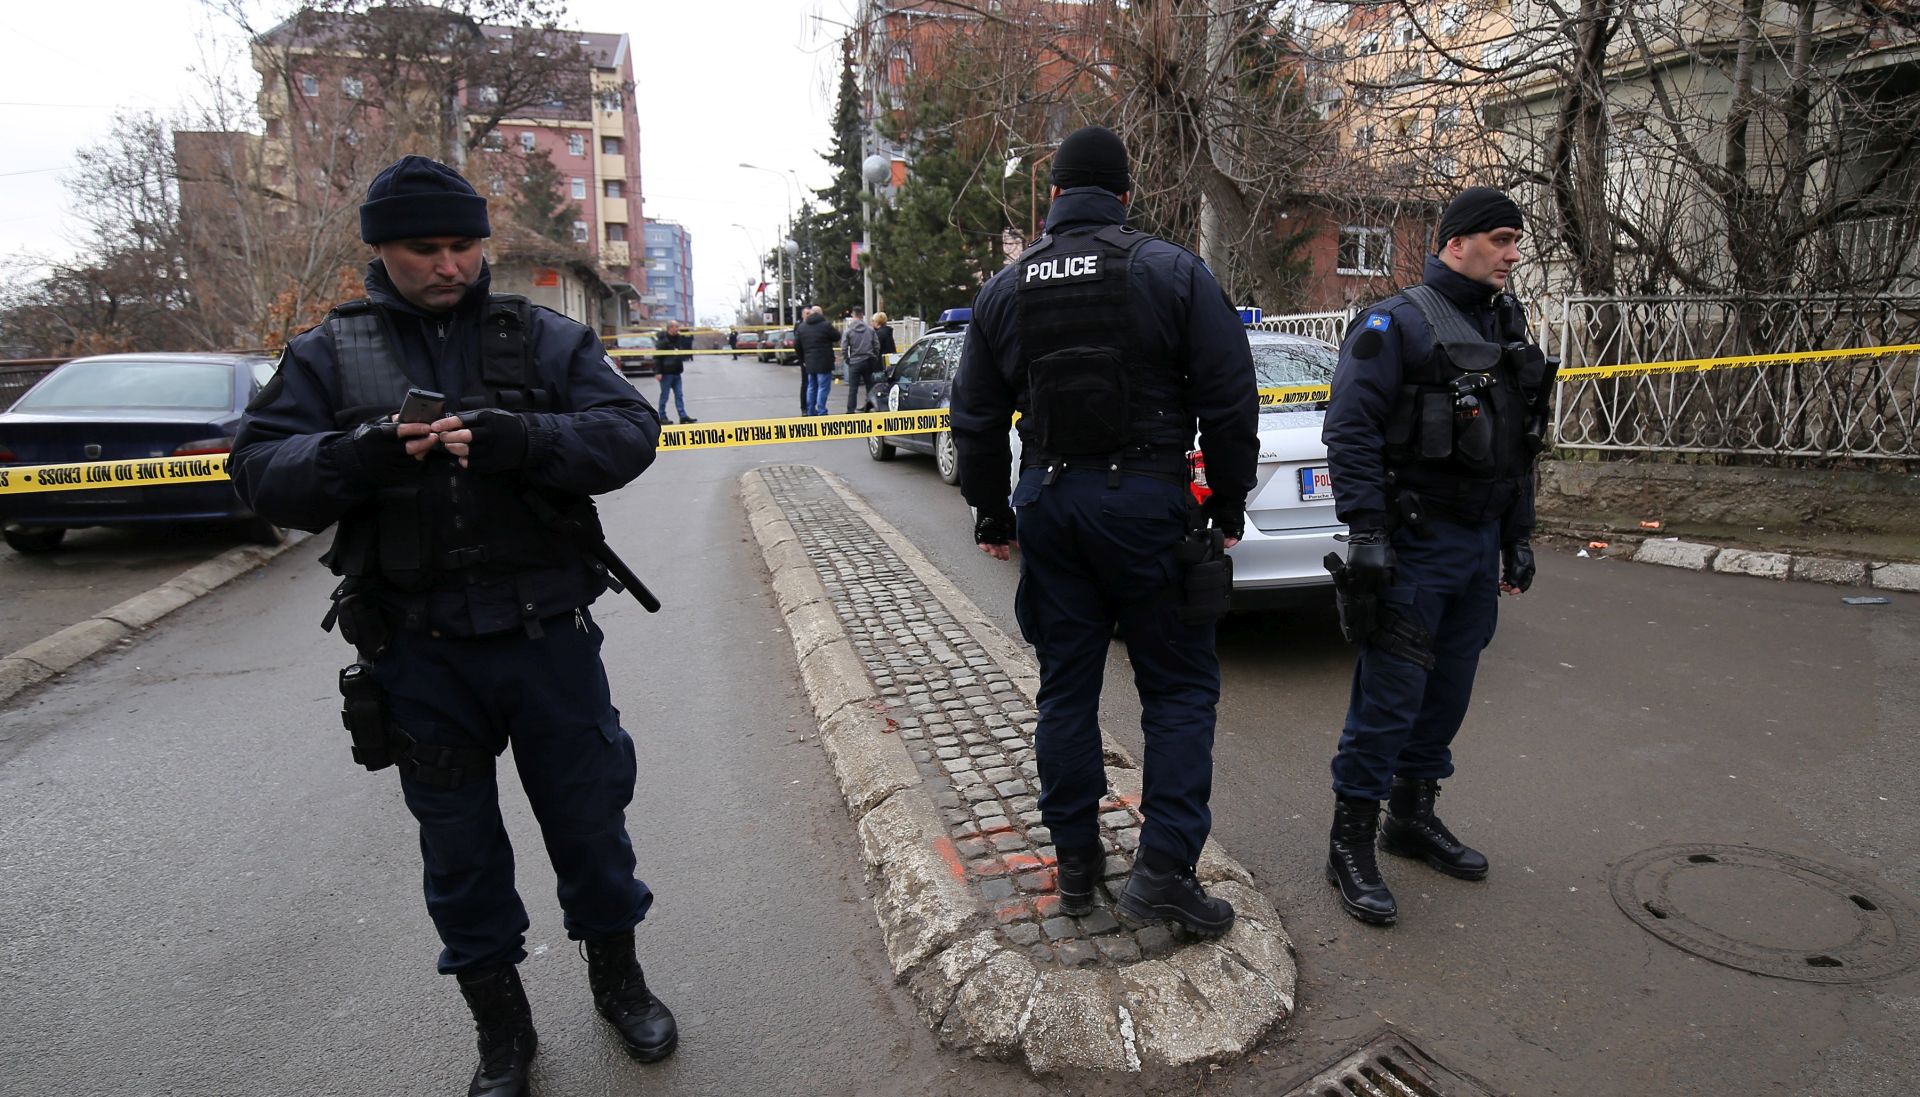 epa06443095 Police guards at the sealed-off crime scene where Oliver Ivanovic, the former State Secretary for Kosovo and Metohija and a subject of a controversial war crimes trial and retrial, was shot in Mitrovica, Serbia, 16 January 2018. The prominent Ivanovic was shot in front of his office in Mitrovica, Kosovo, 16 January 2018, according to media reports.  EPA/STRINGER